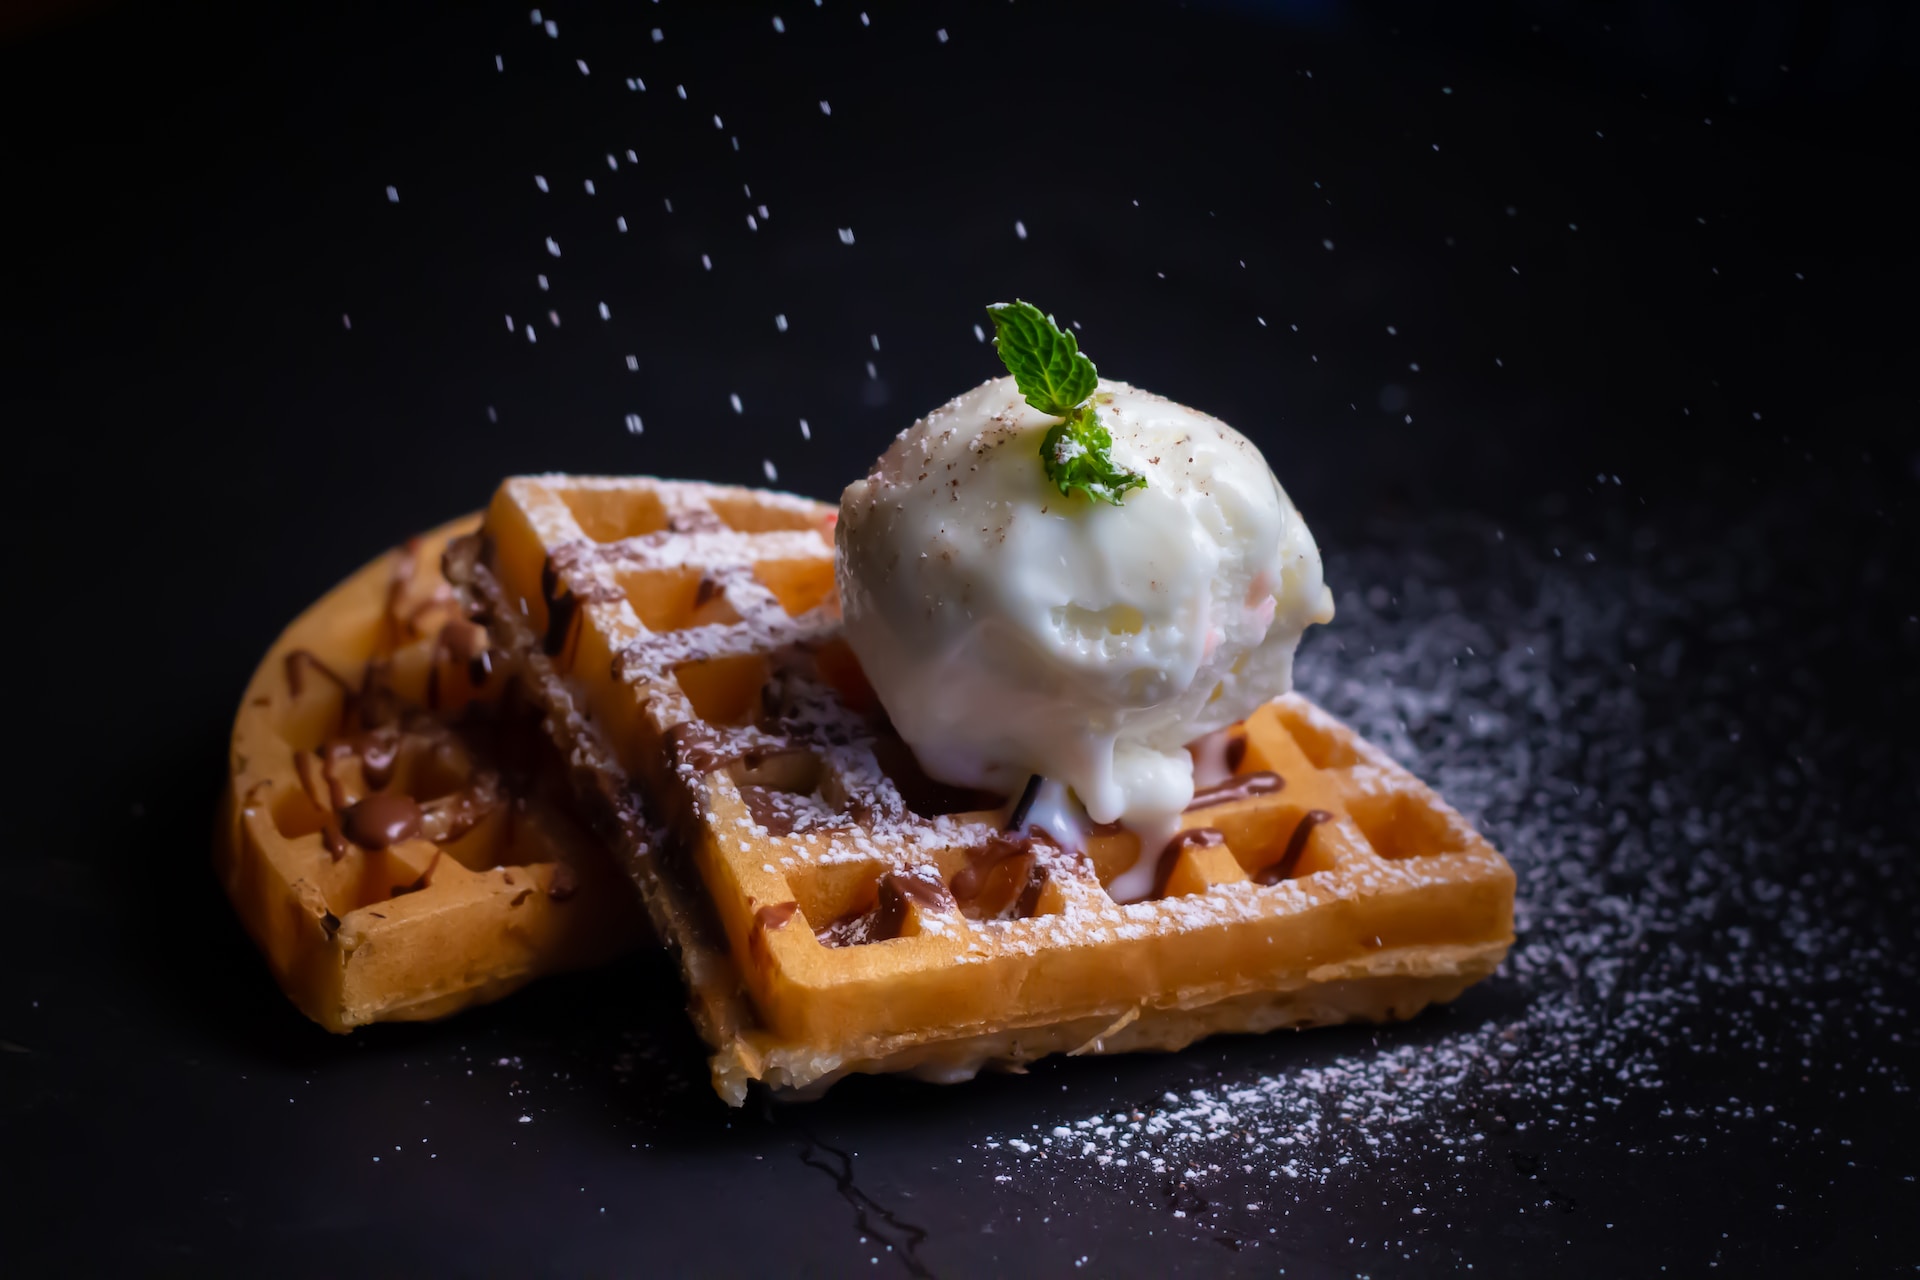 Waffle House St Albans: A Taste of Sweet Perfection